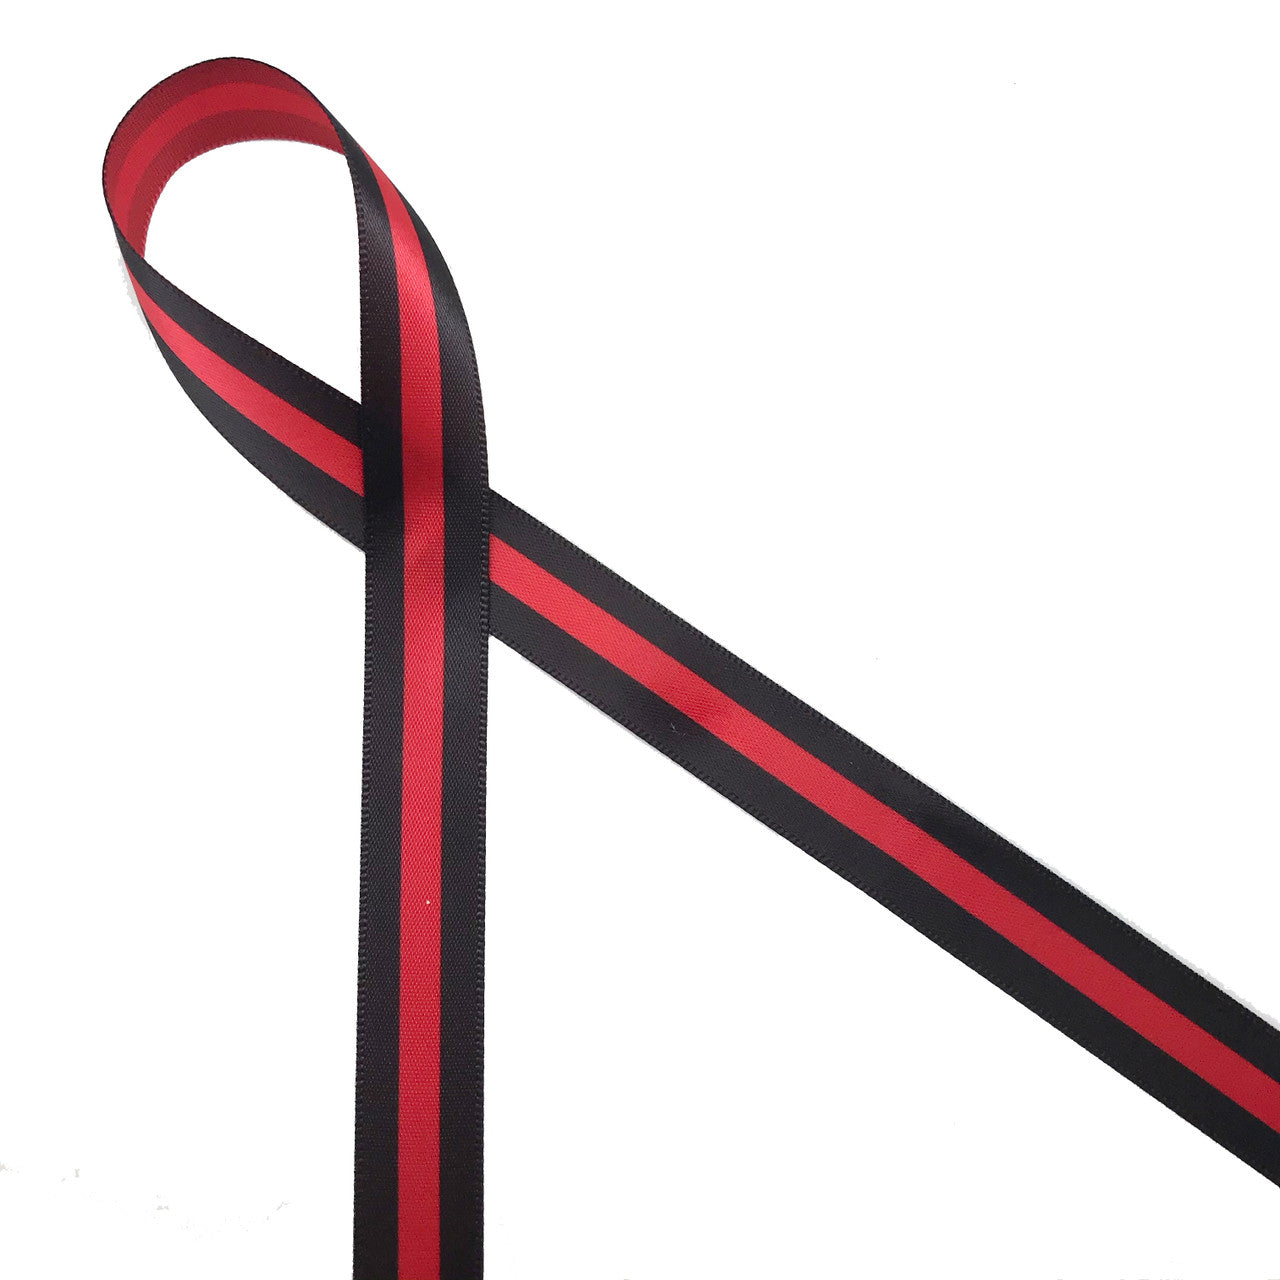 Red Ribbon Thin: Over 4,882 Royalty-Free Licensable Stock